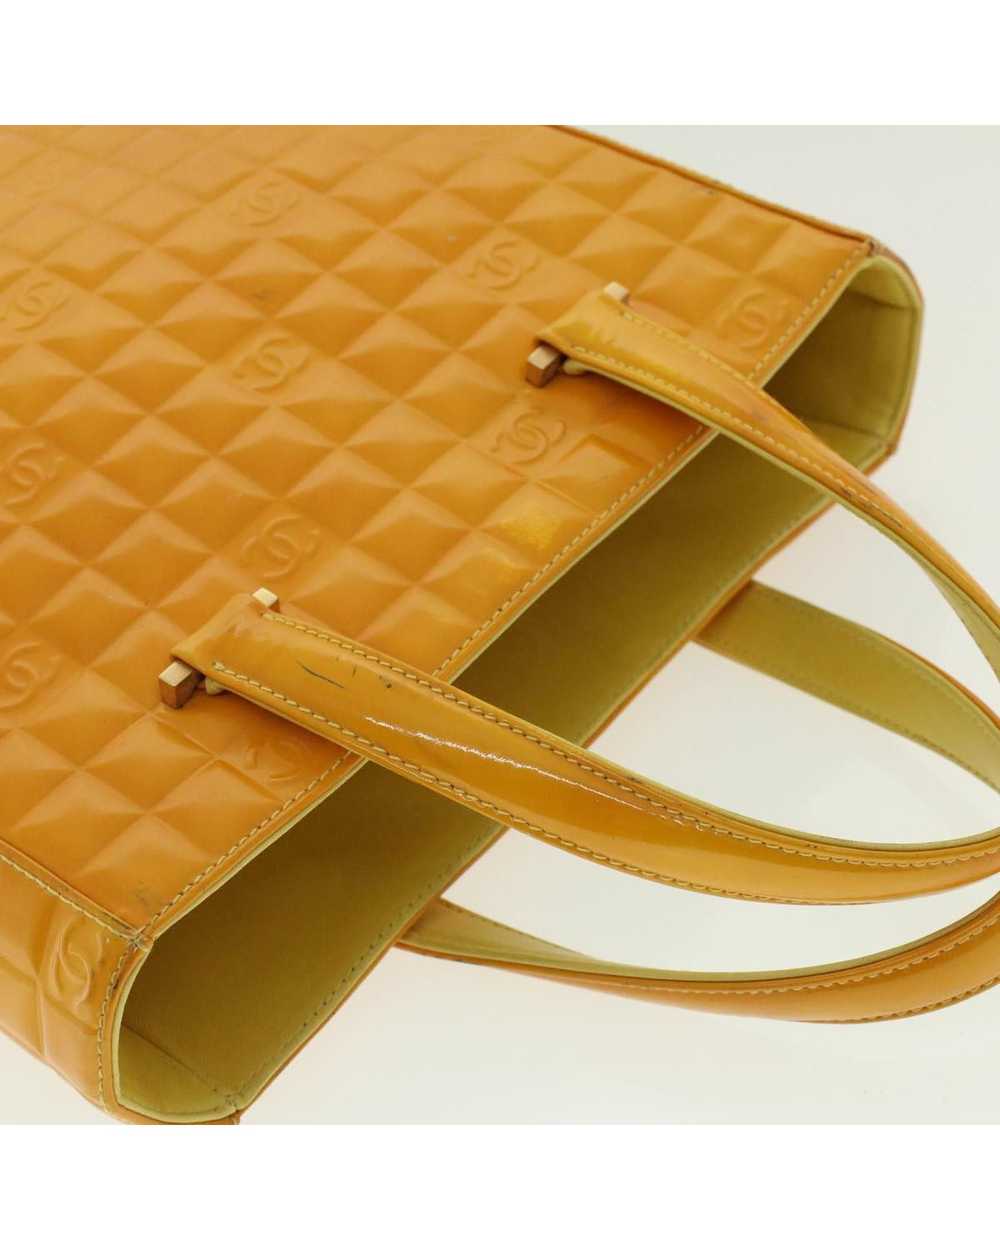 Chanel Yellow Patent Leather Hand Bag - image 6